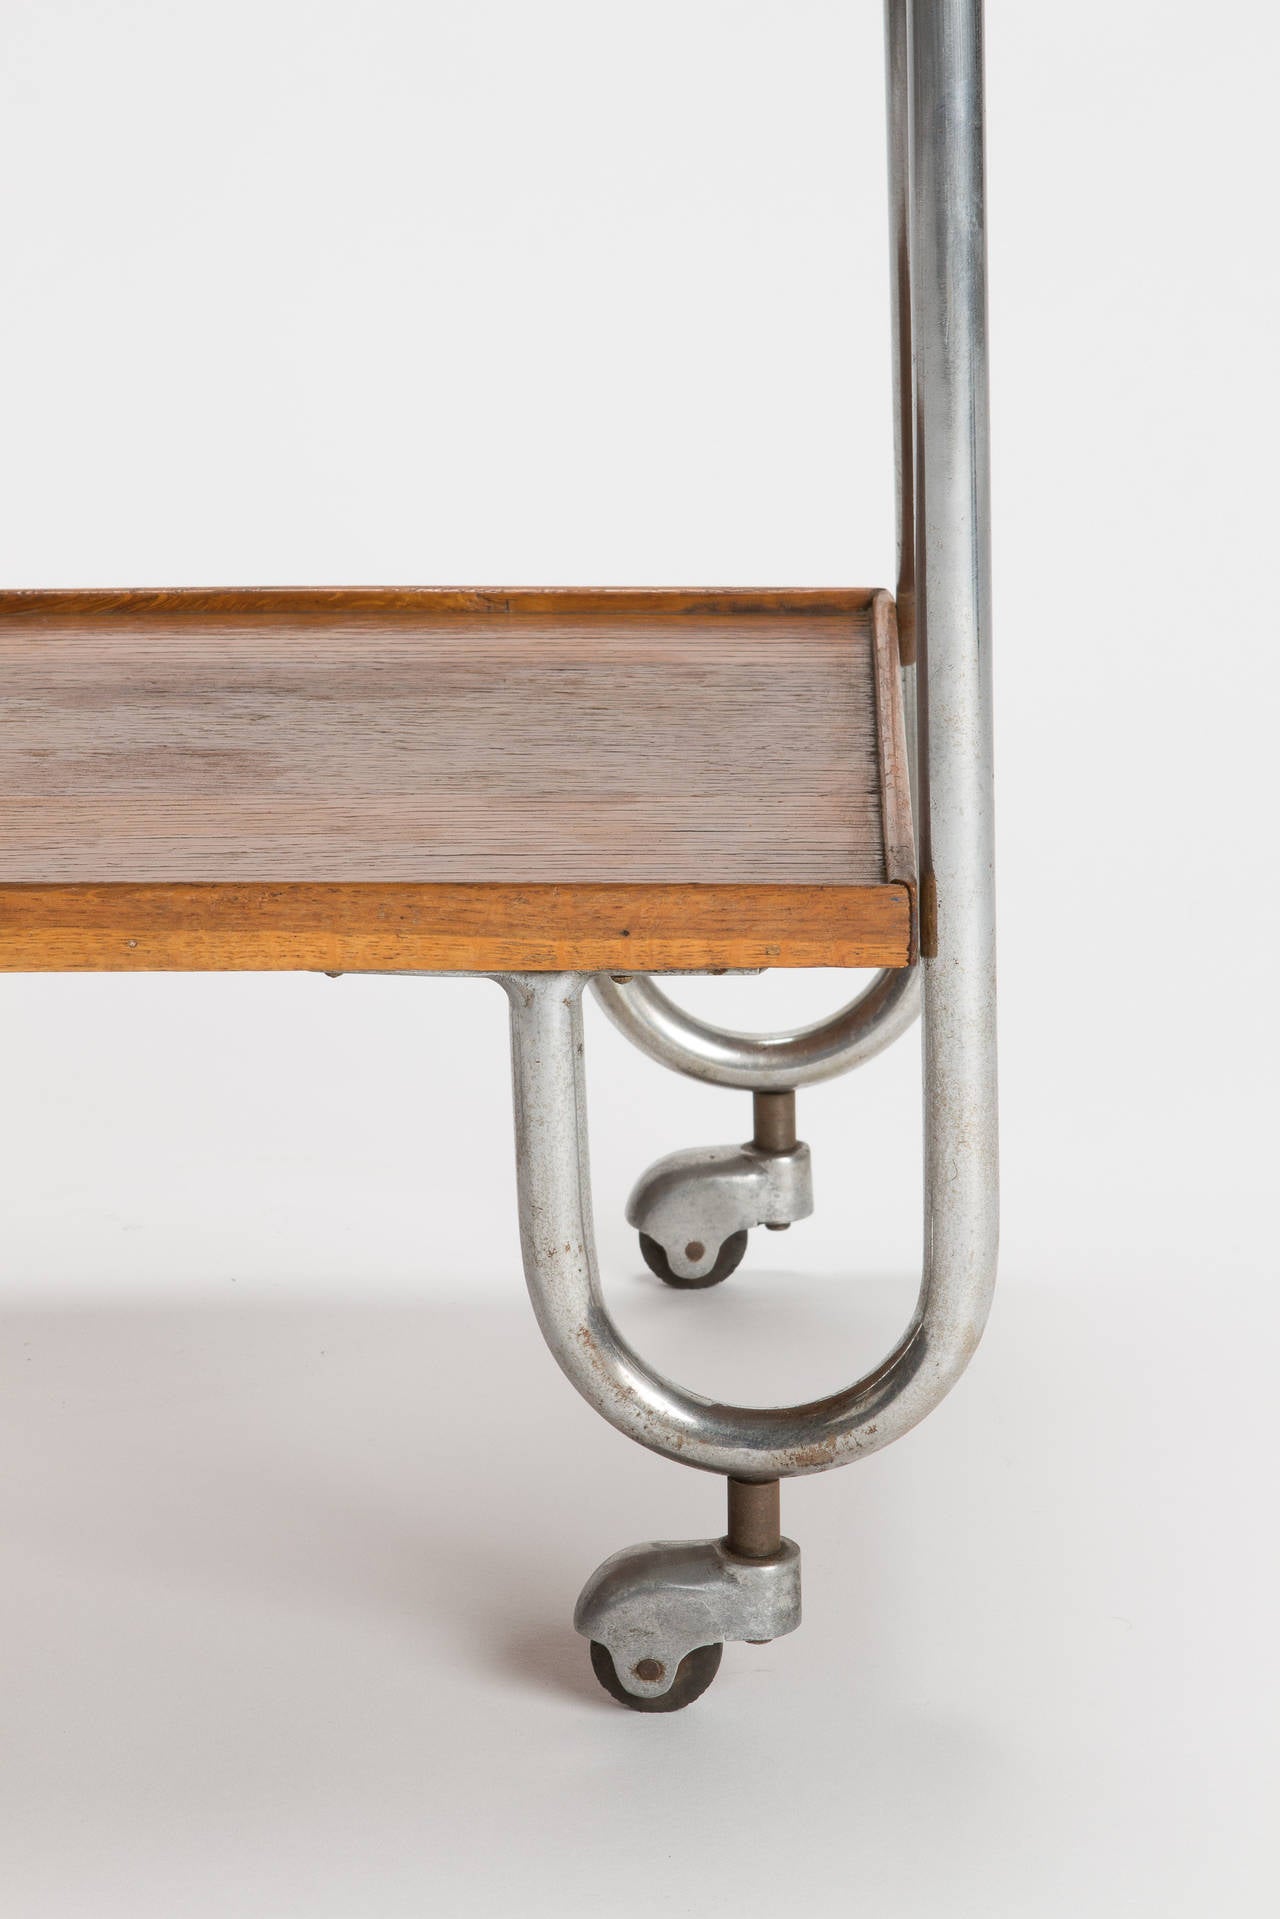 Mid-20th Century Bauhaus Serving Trolley Bar Cart Steel Tube, 1930s For Sale